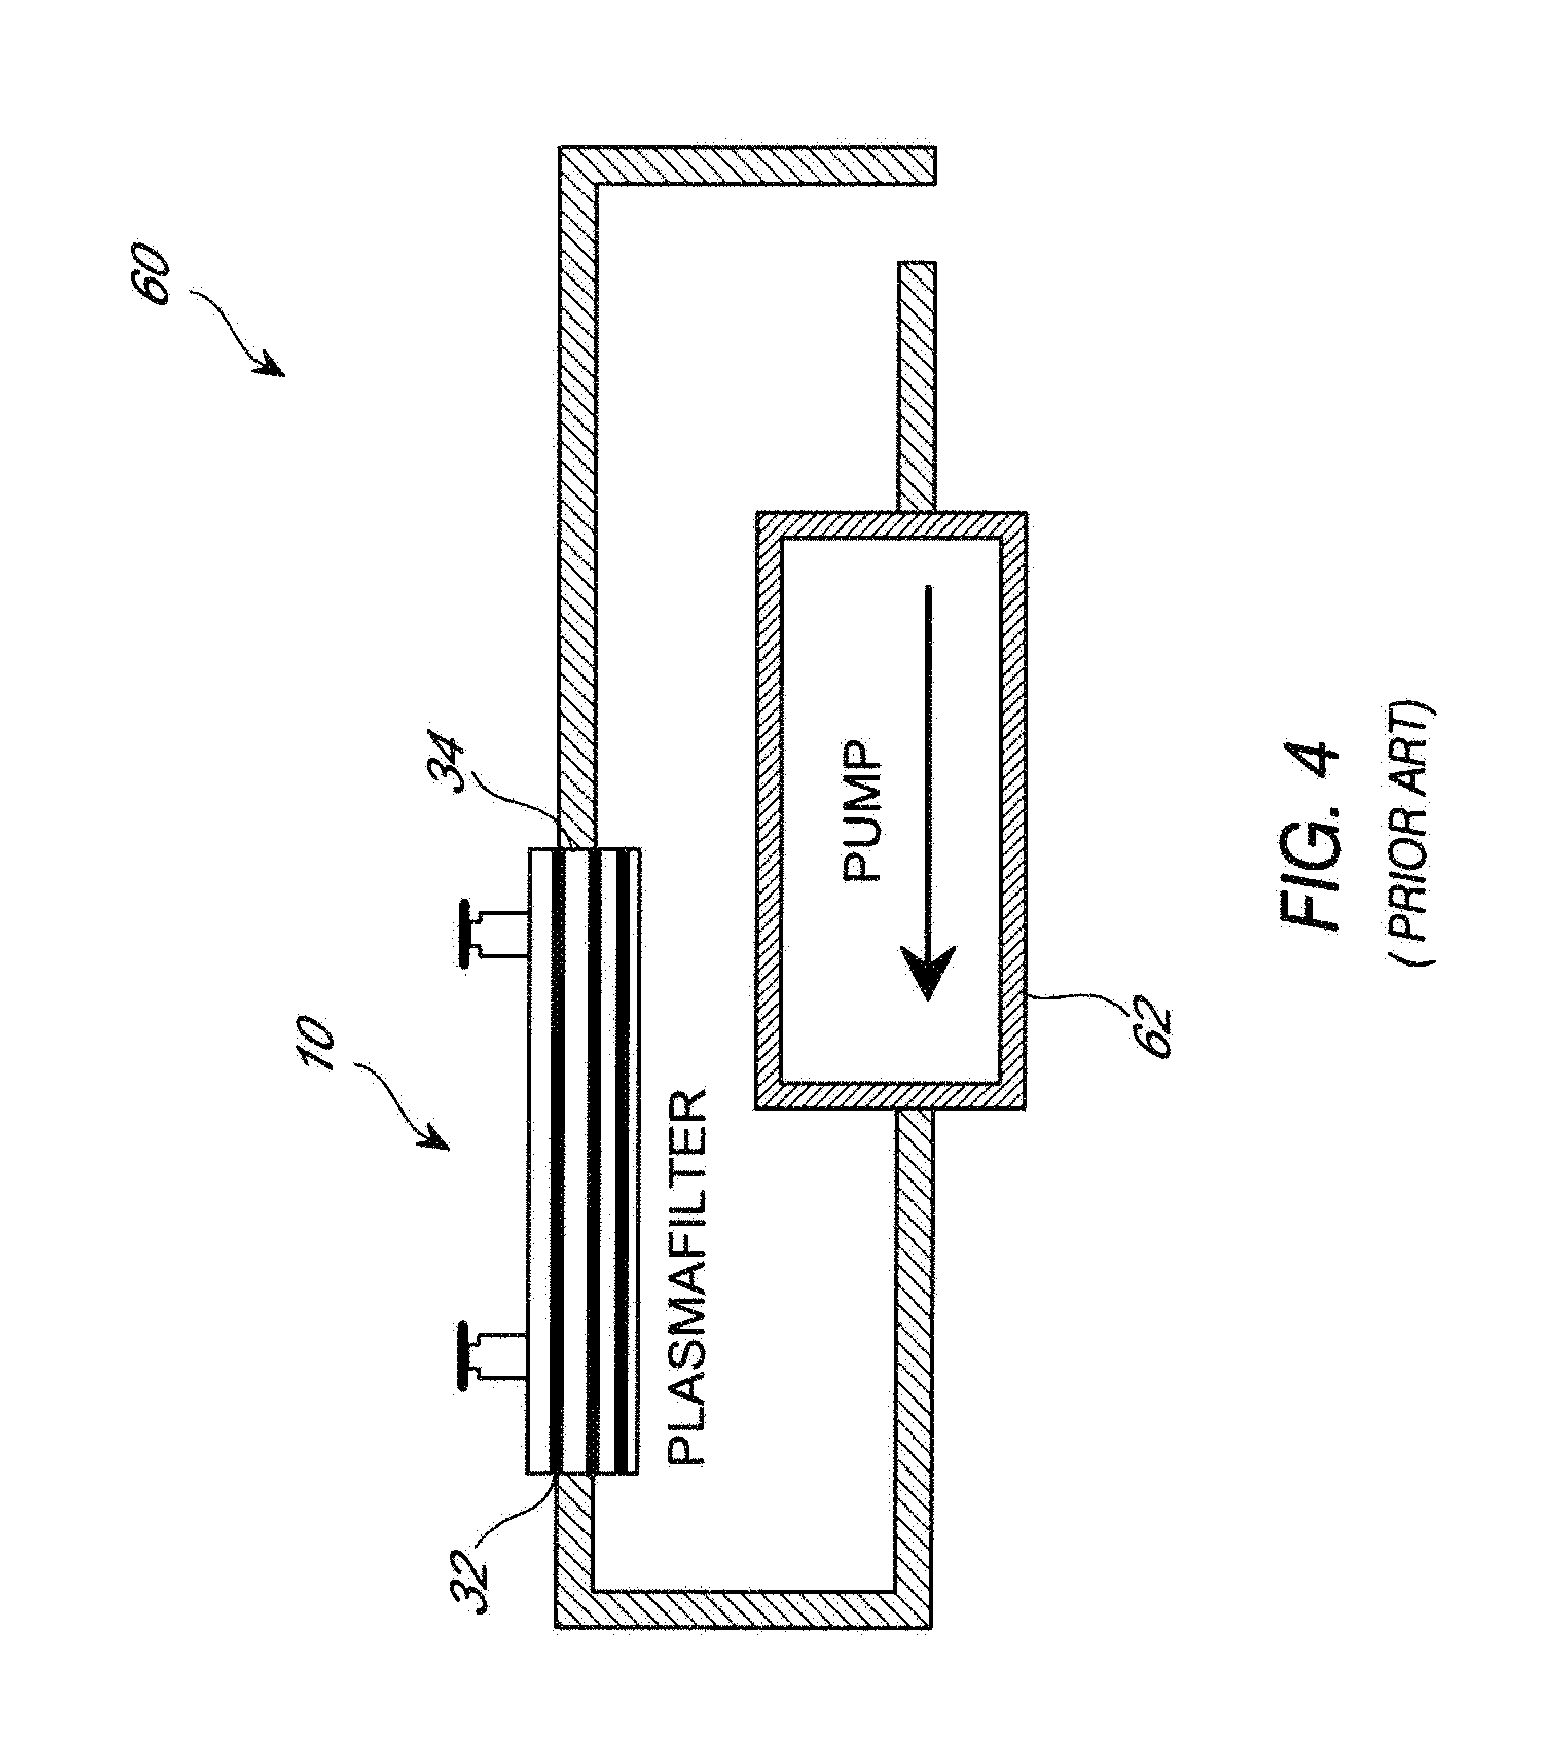 Enhanced antiviral therapy methods and devices